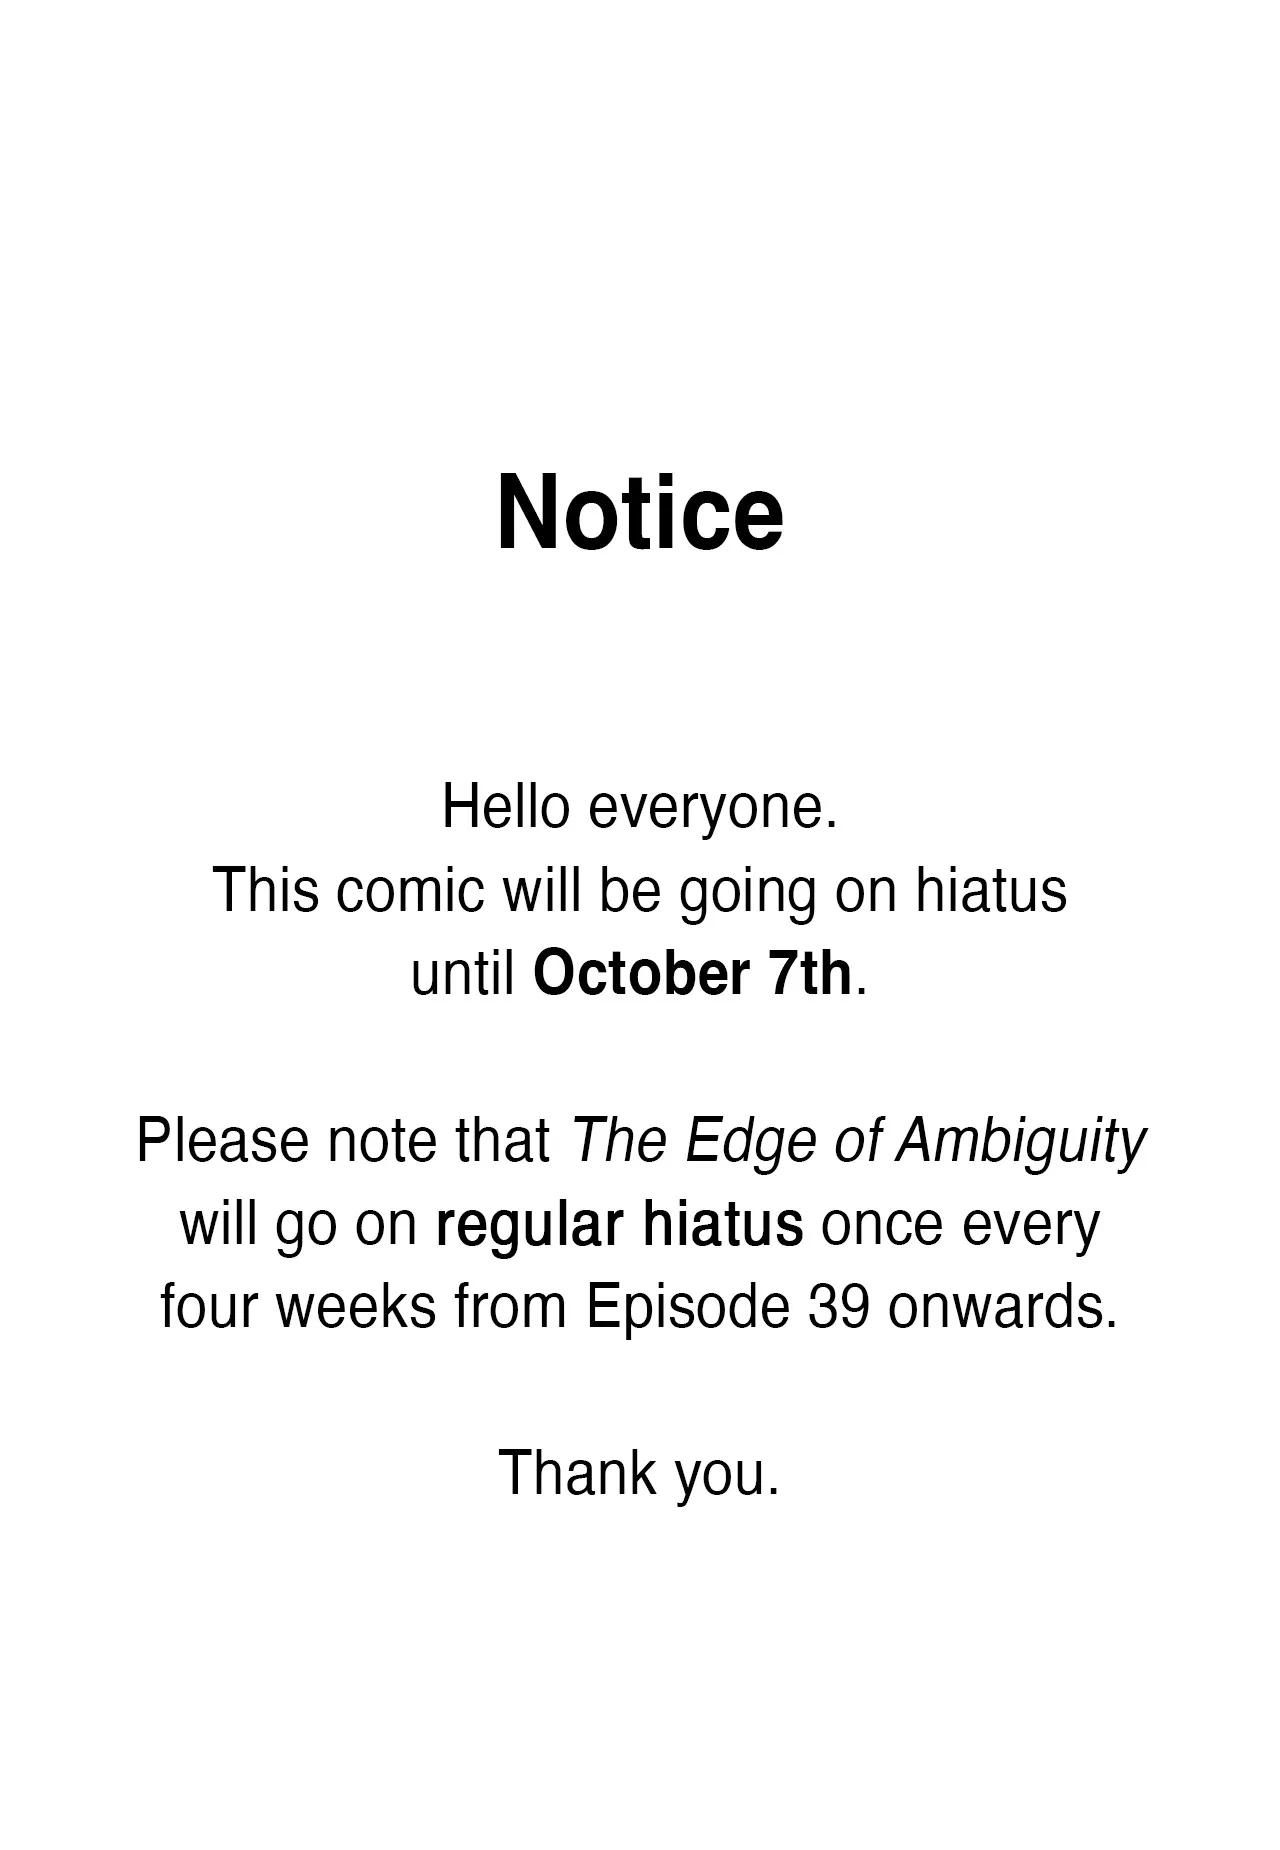 The Edge Of Ambiguity - Page 1